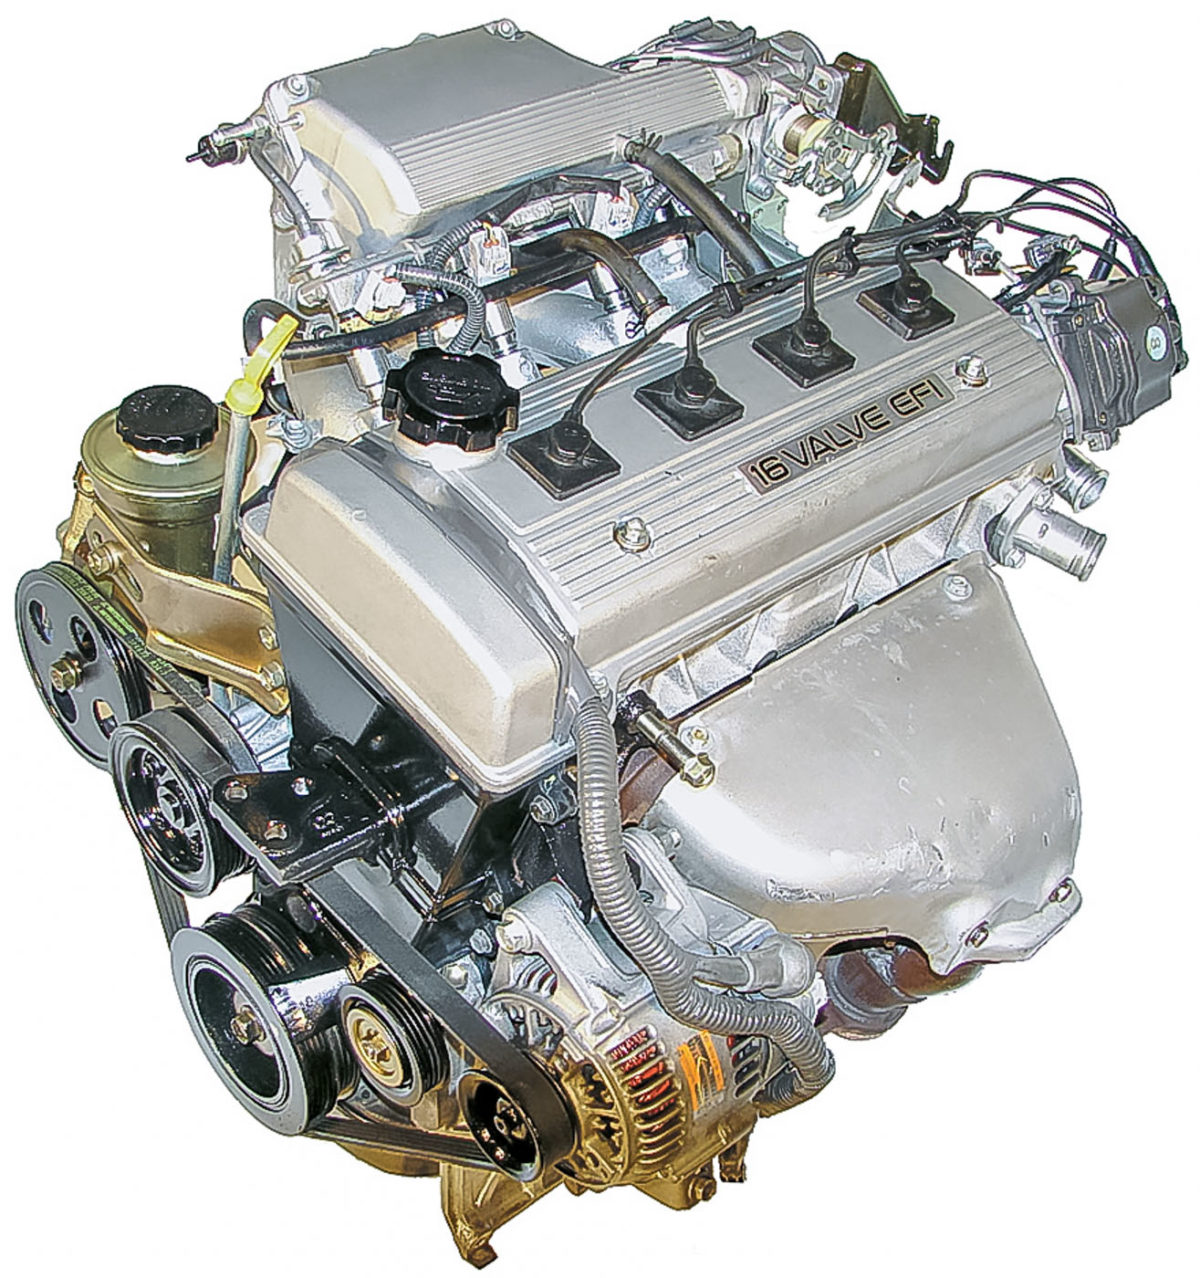 Used Toyota Engines & Transmissions for Sale | Engine World